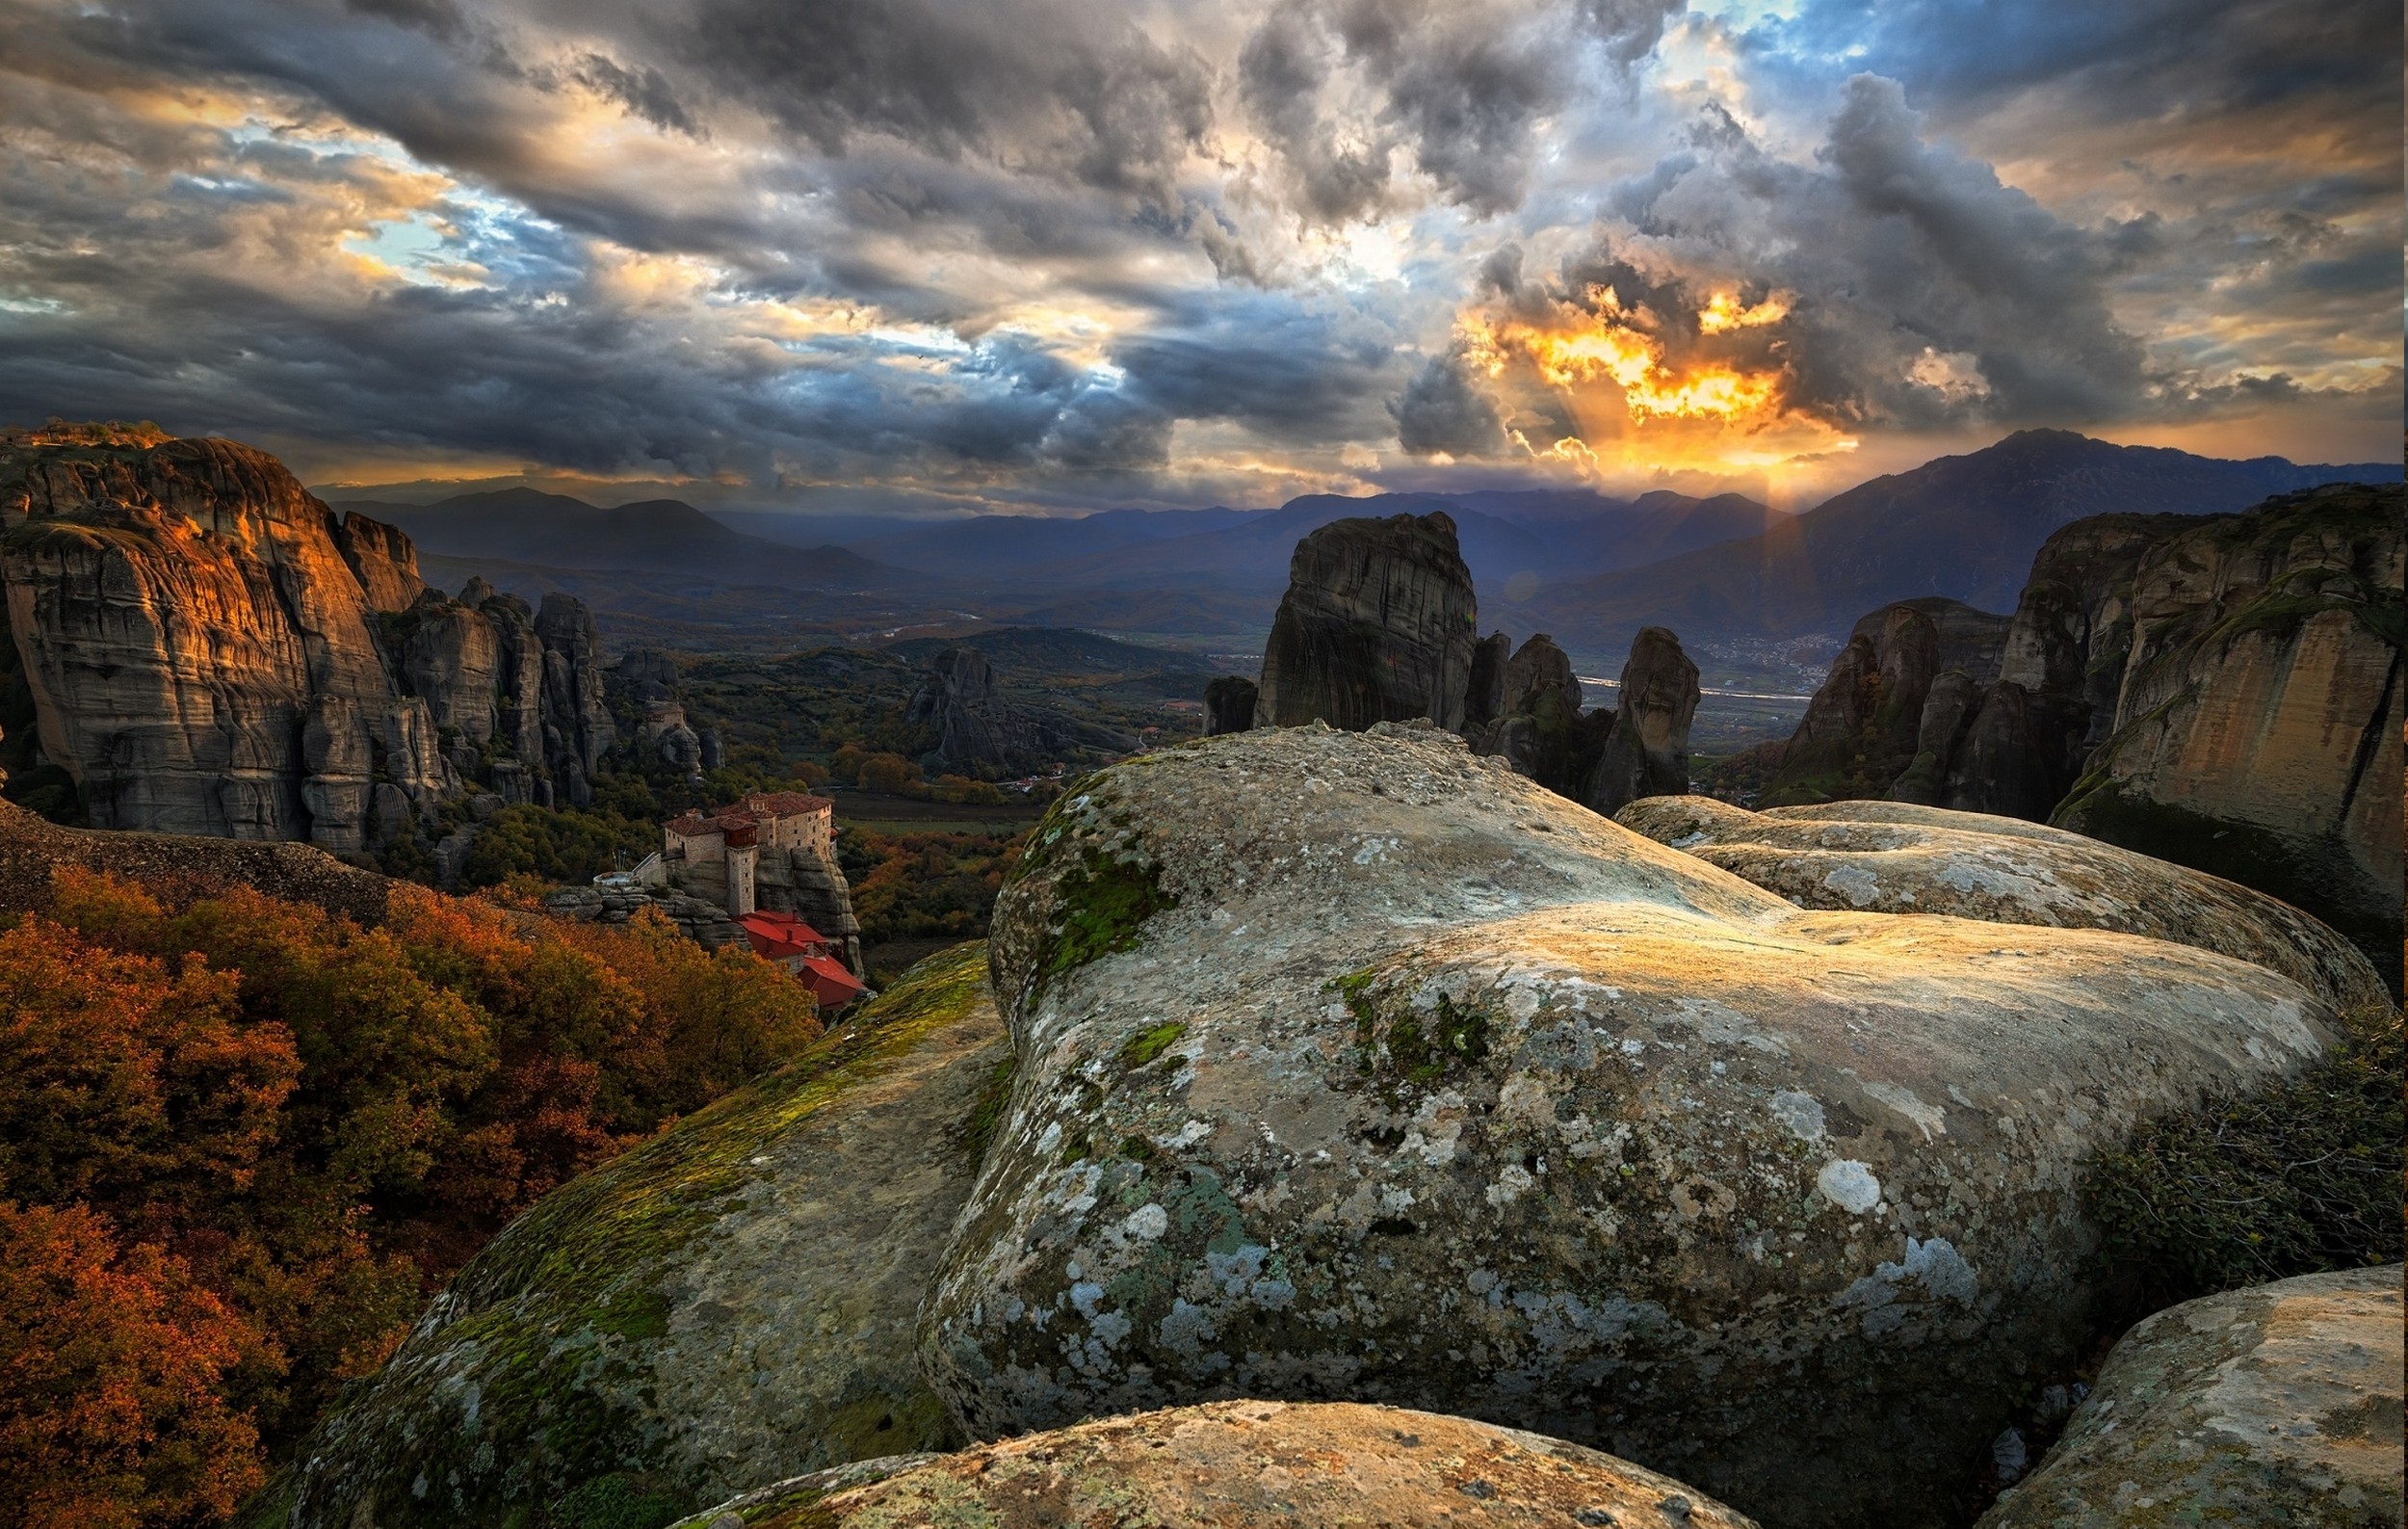 nature, Landscape, Mountain, Sunset, Greece, Monastery, Cliff, Clouds, Fall Wallpaper